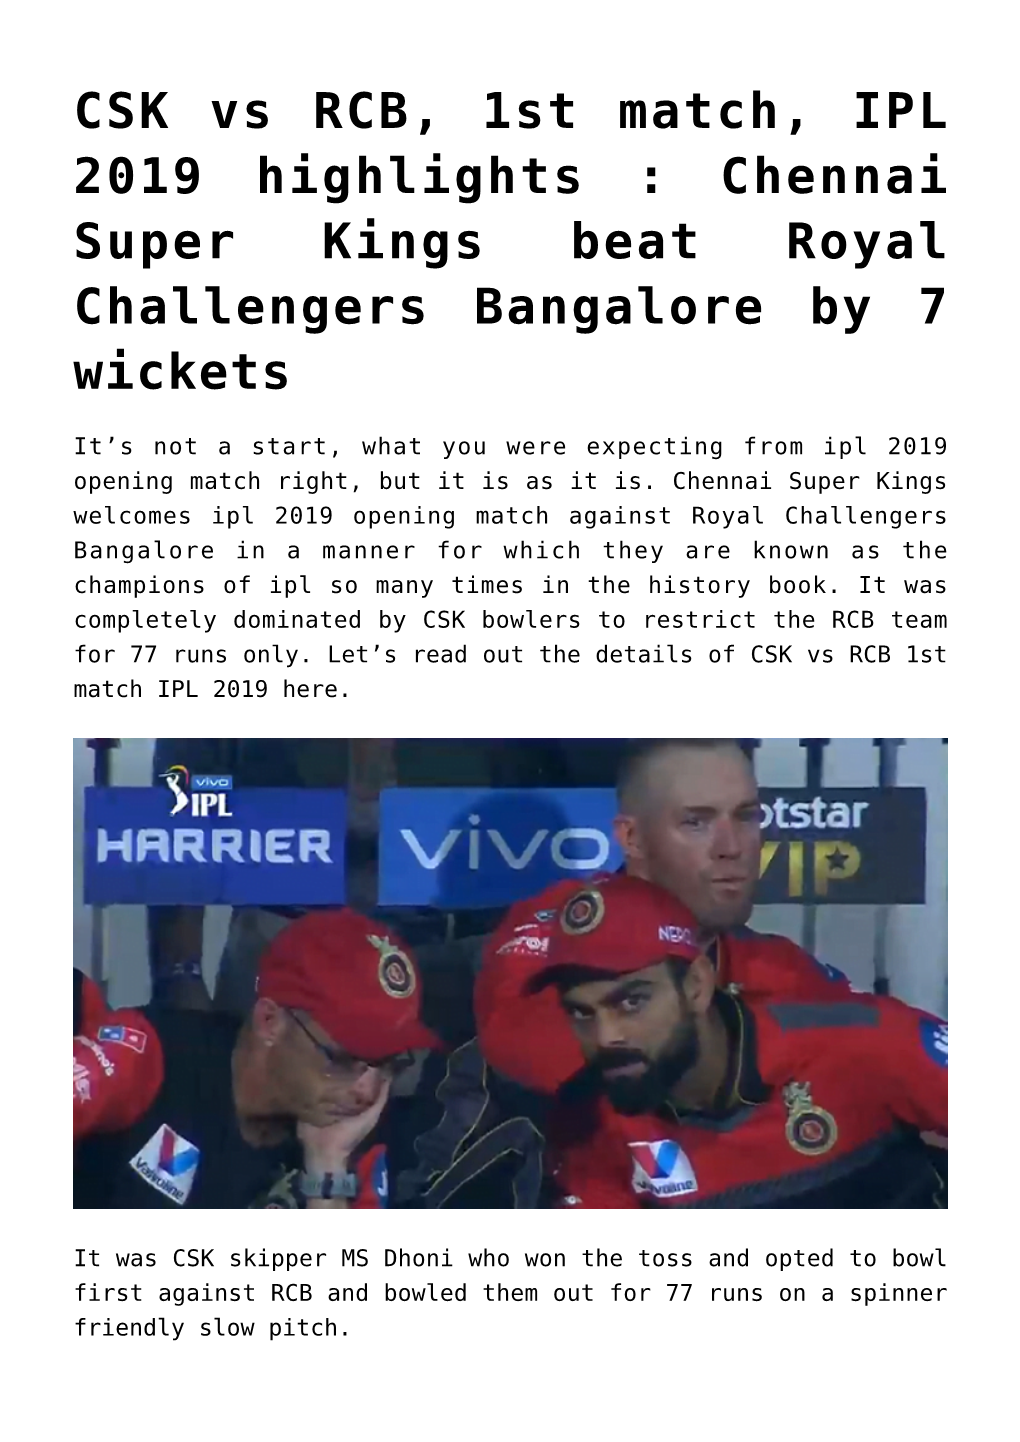 CSK Vs RCB, 1St Match, IPL 2019 Highlights : Chennai Super Kings Beat Royal Challengers Bangalore by 7 Wickets